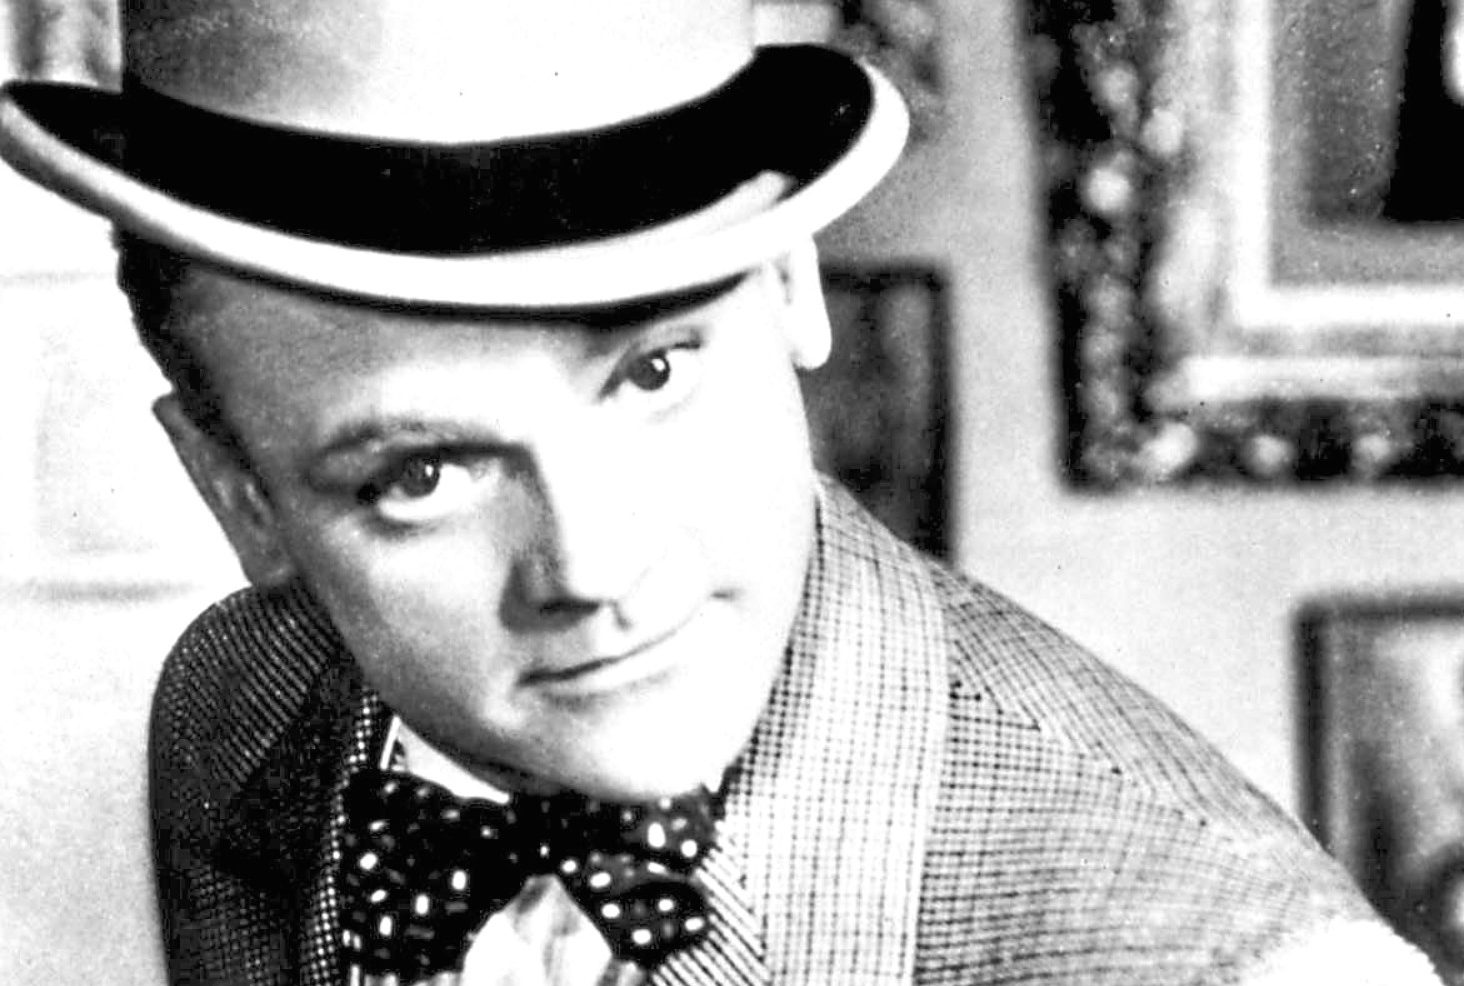 James Cagney in Yankee Doodle Dandy, 1942